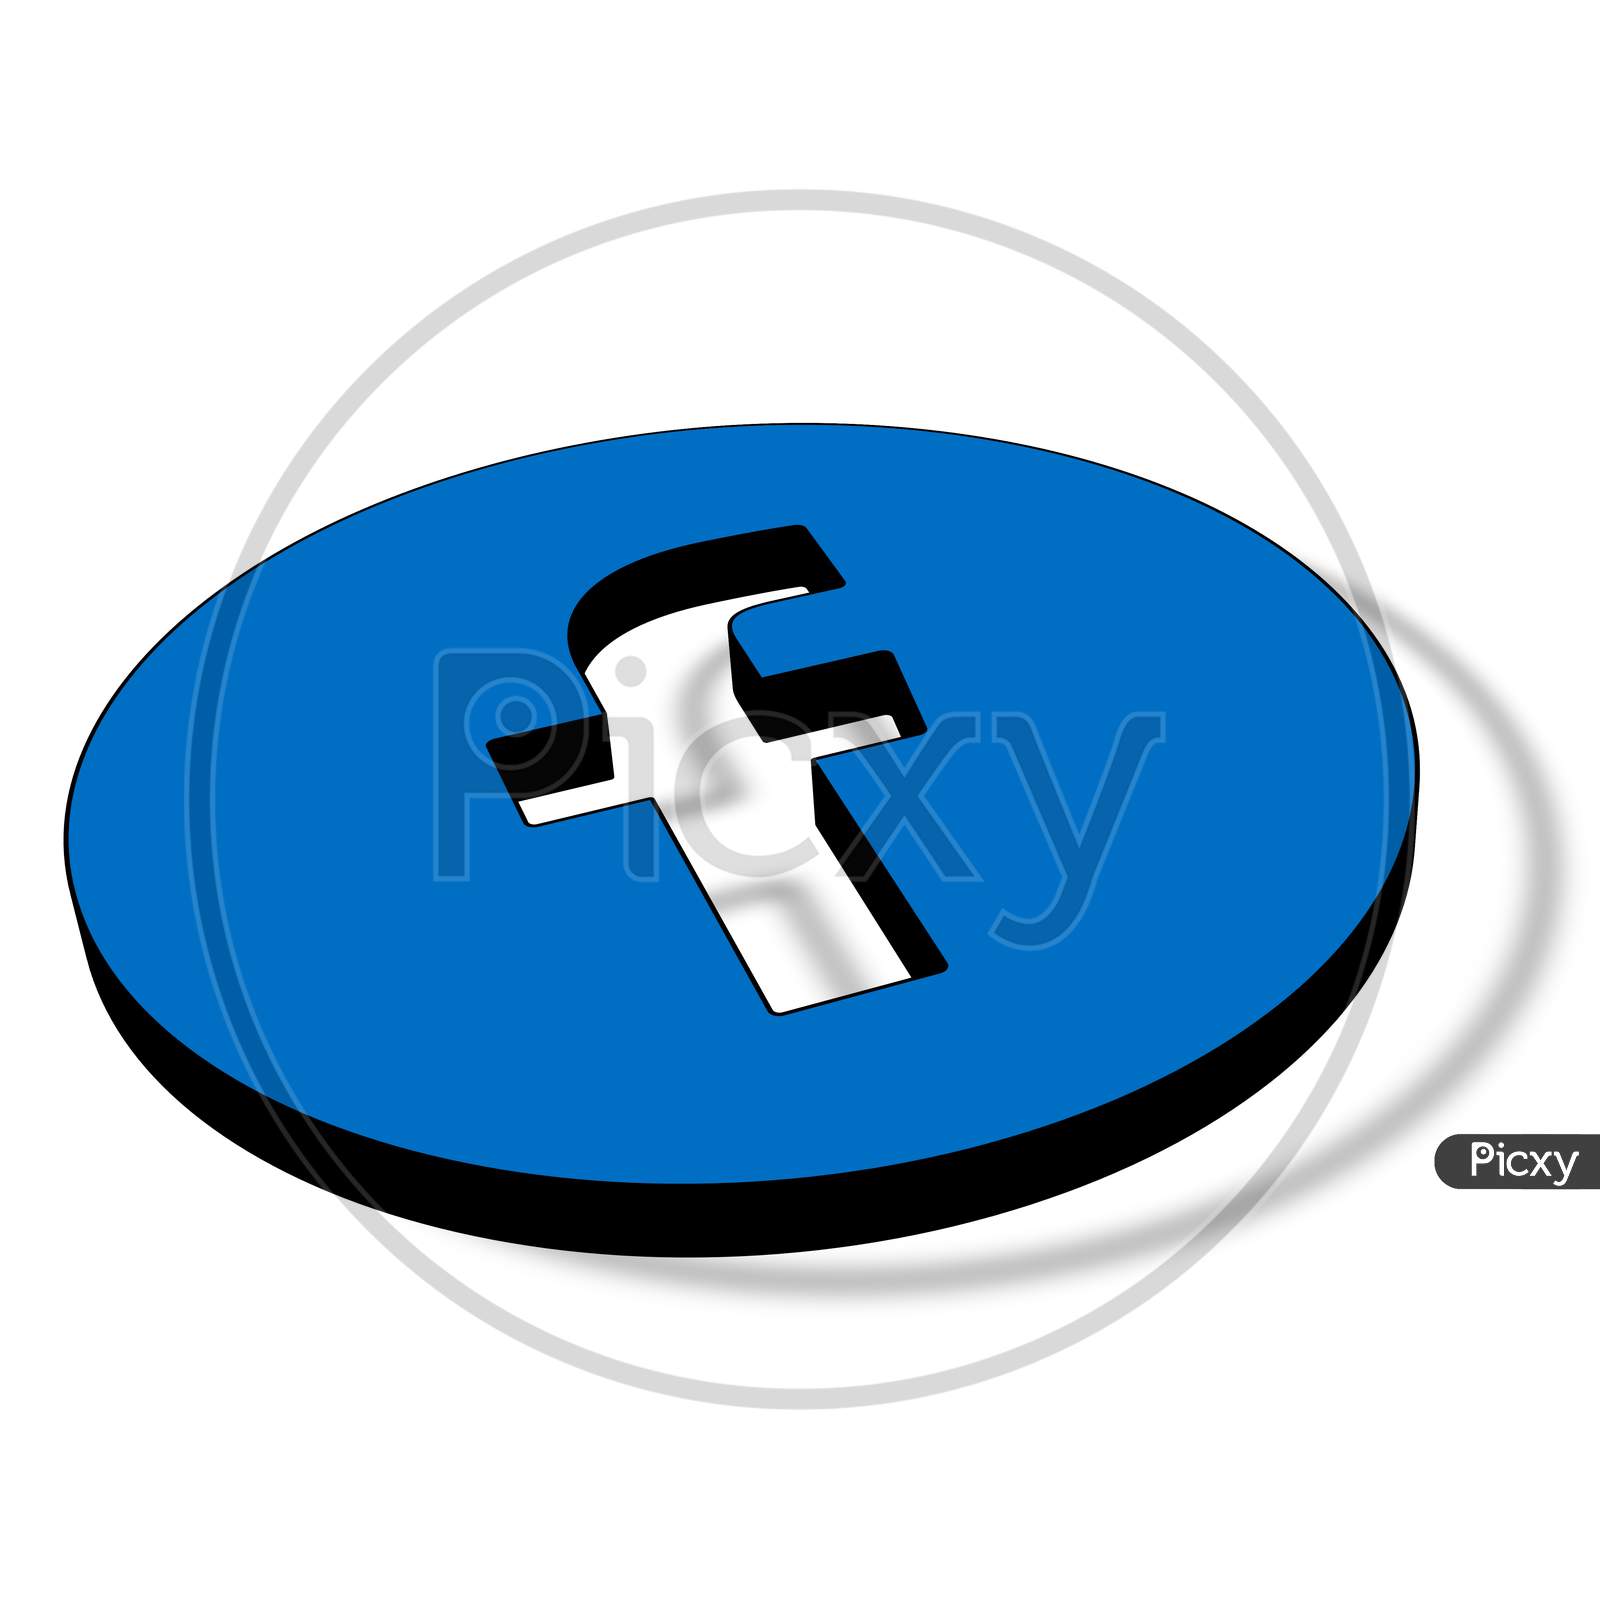 Image of Design on 3d Facebook logo, icons Illustration-GO232989-Picxy